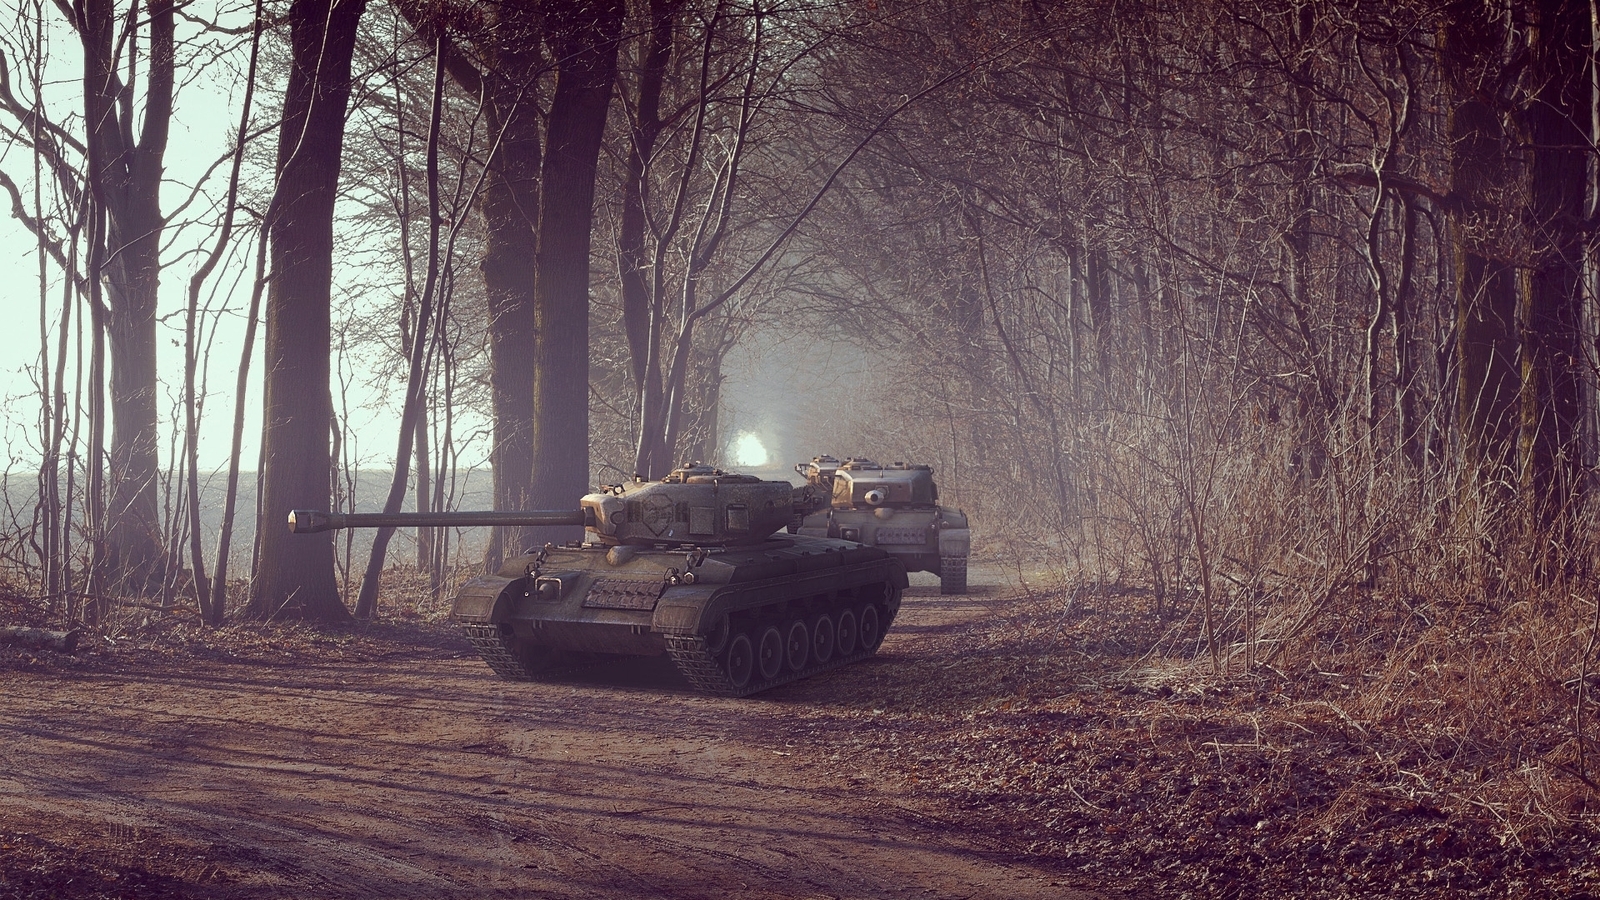 Image: Tanks, forest, road, trees, branches